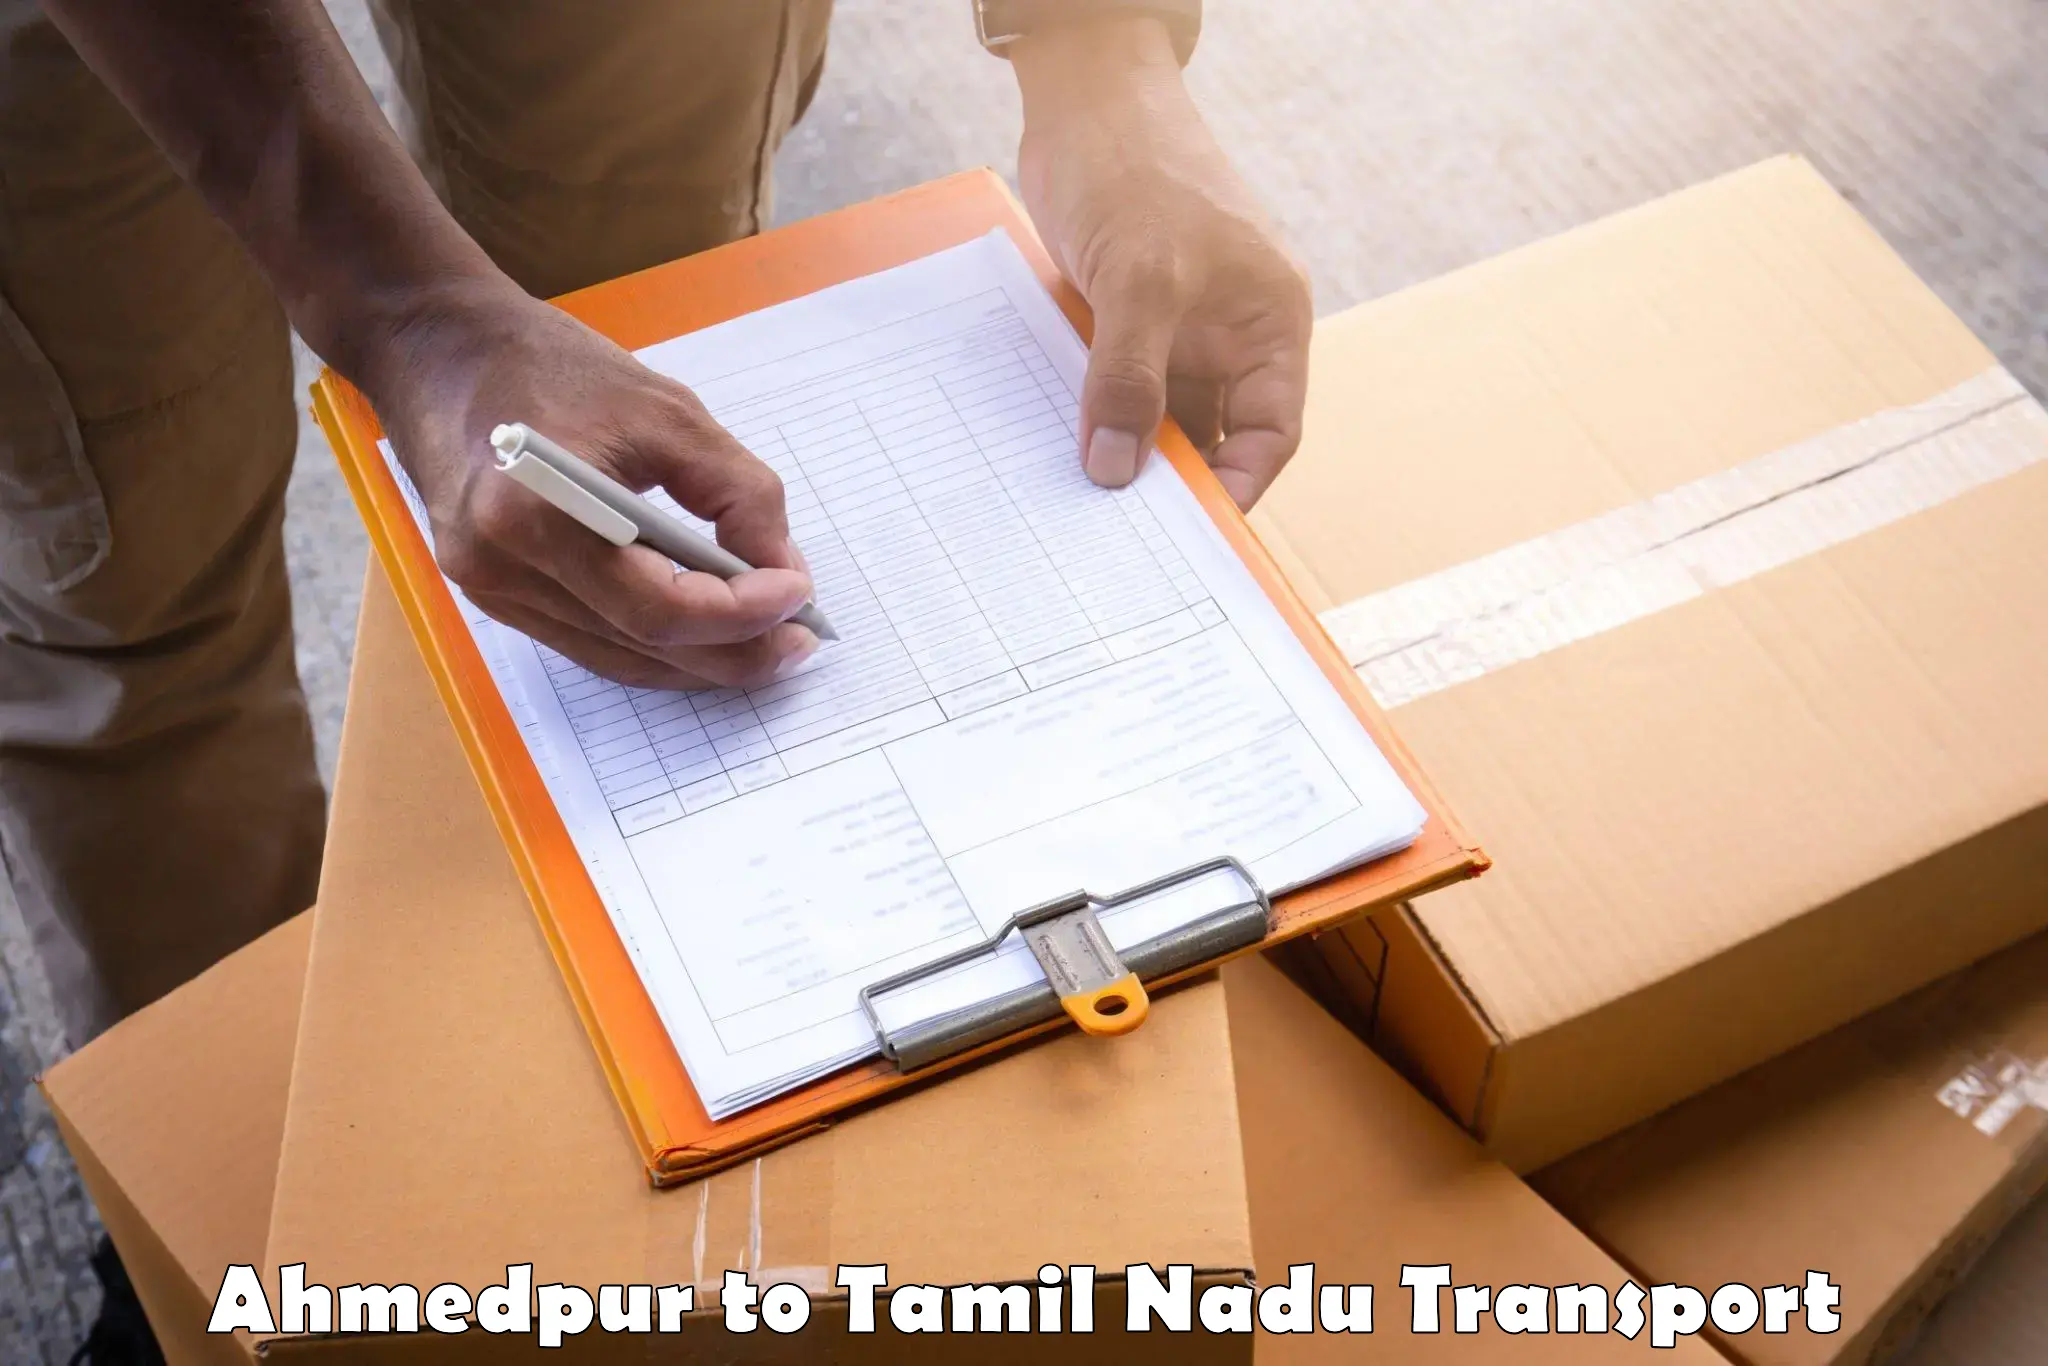 Goods transport services Ahmedpur to Vellore